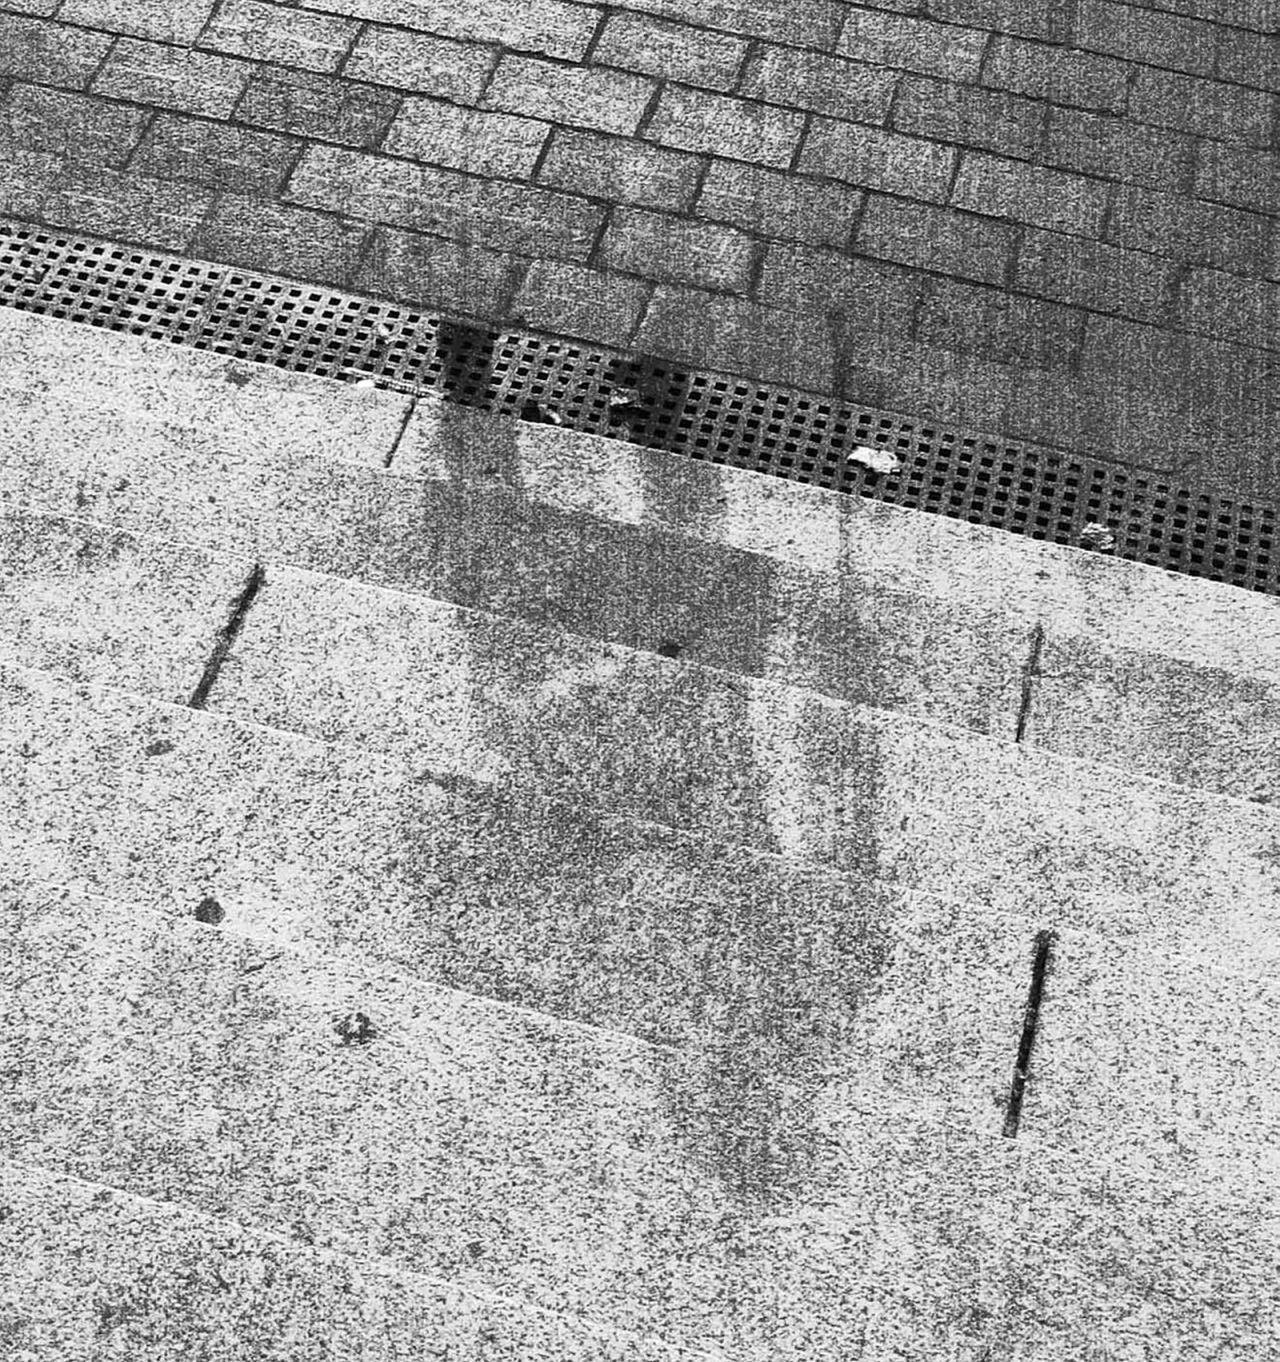 A person's outline is seen on bank steps after the bombing in Hiroshima.